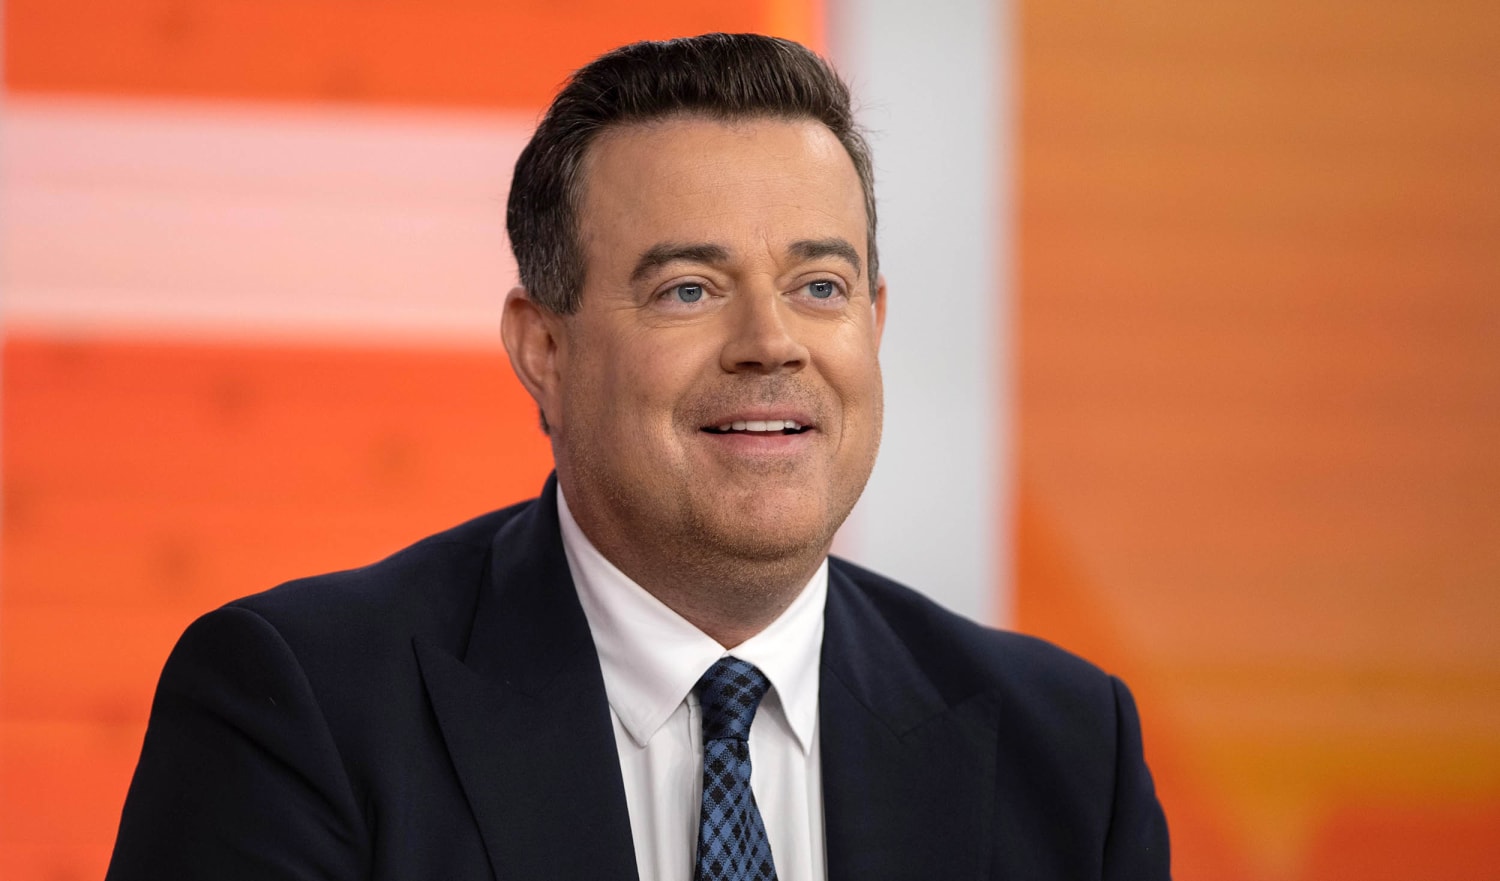 Carson Daly is in People's Sexiest Man Alive issue